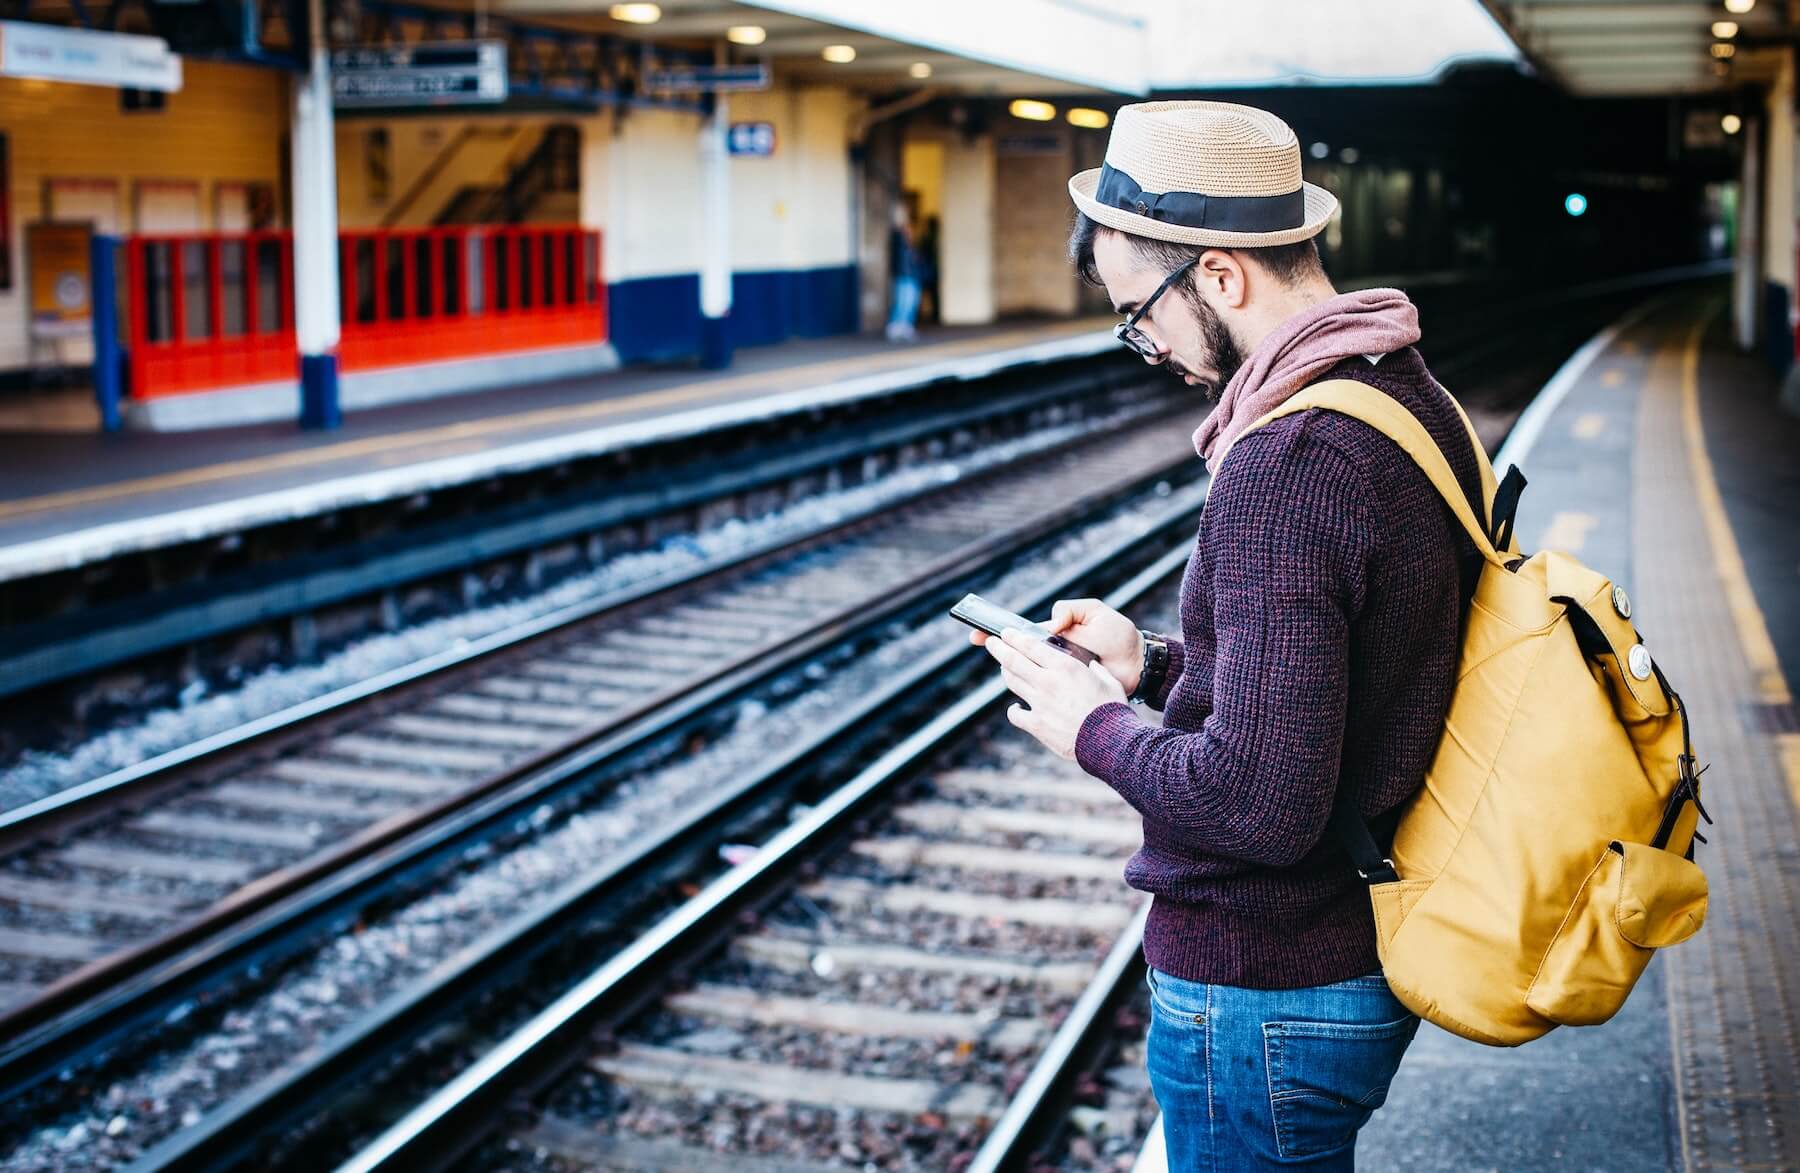 Man standing near train tracks, focused on studying on his mobile phone.